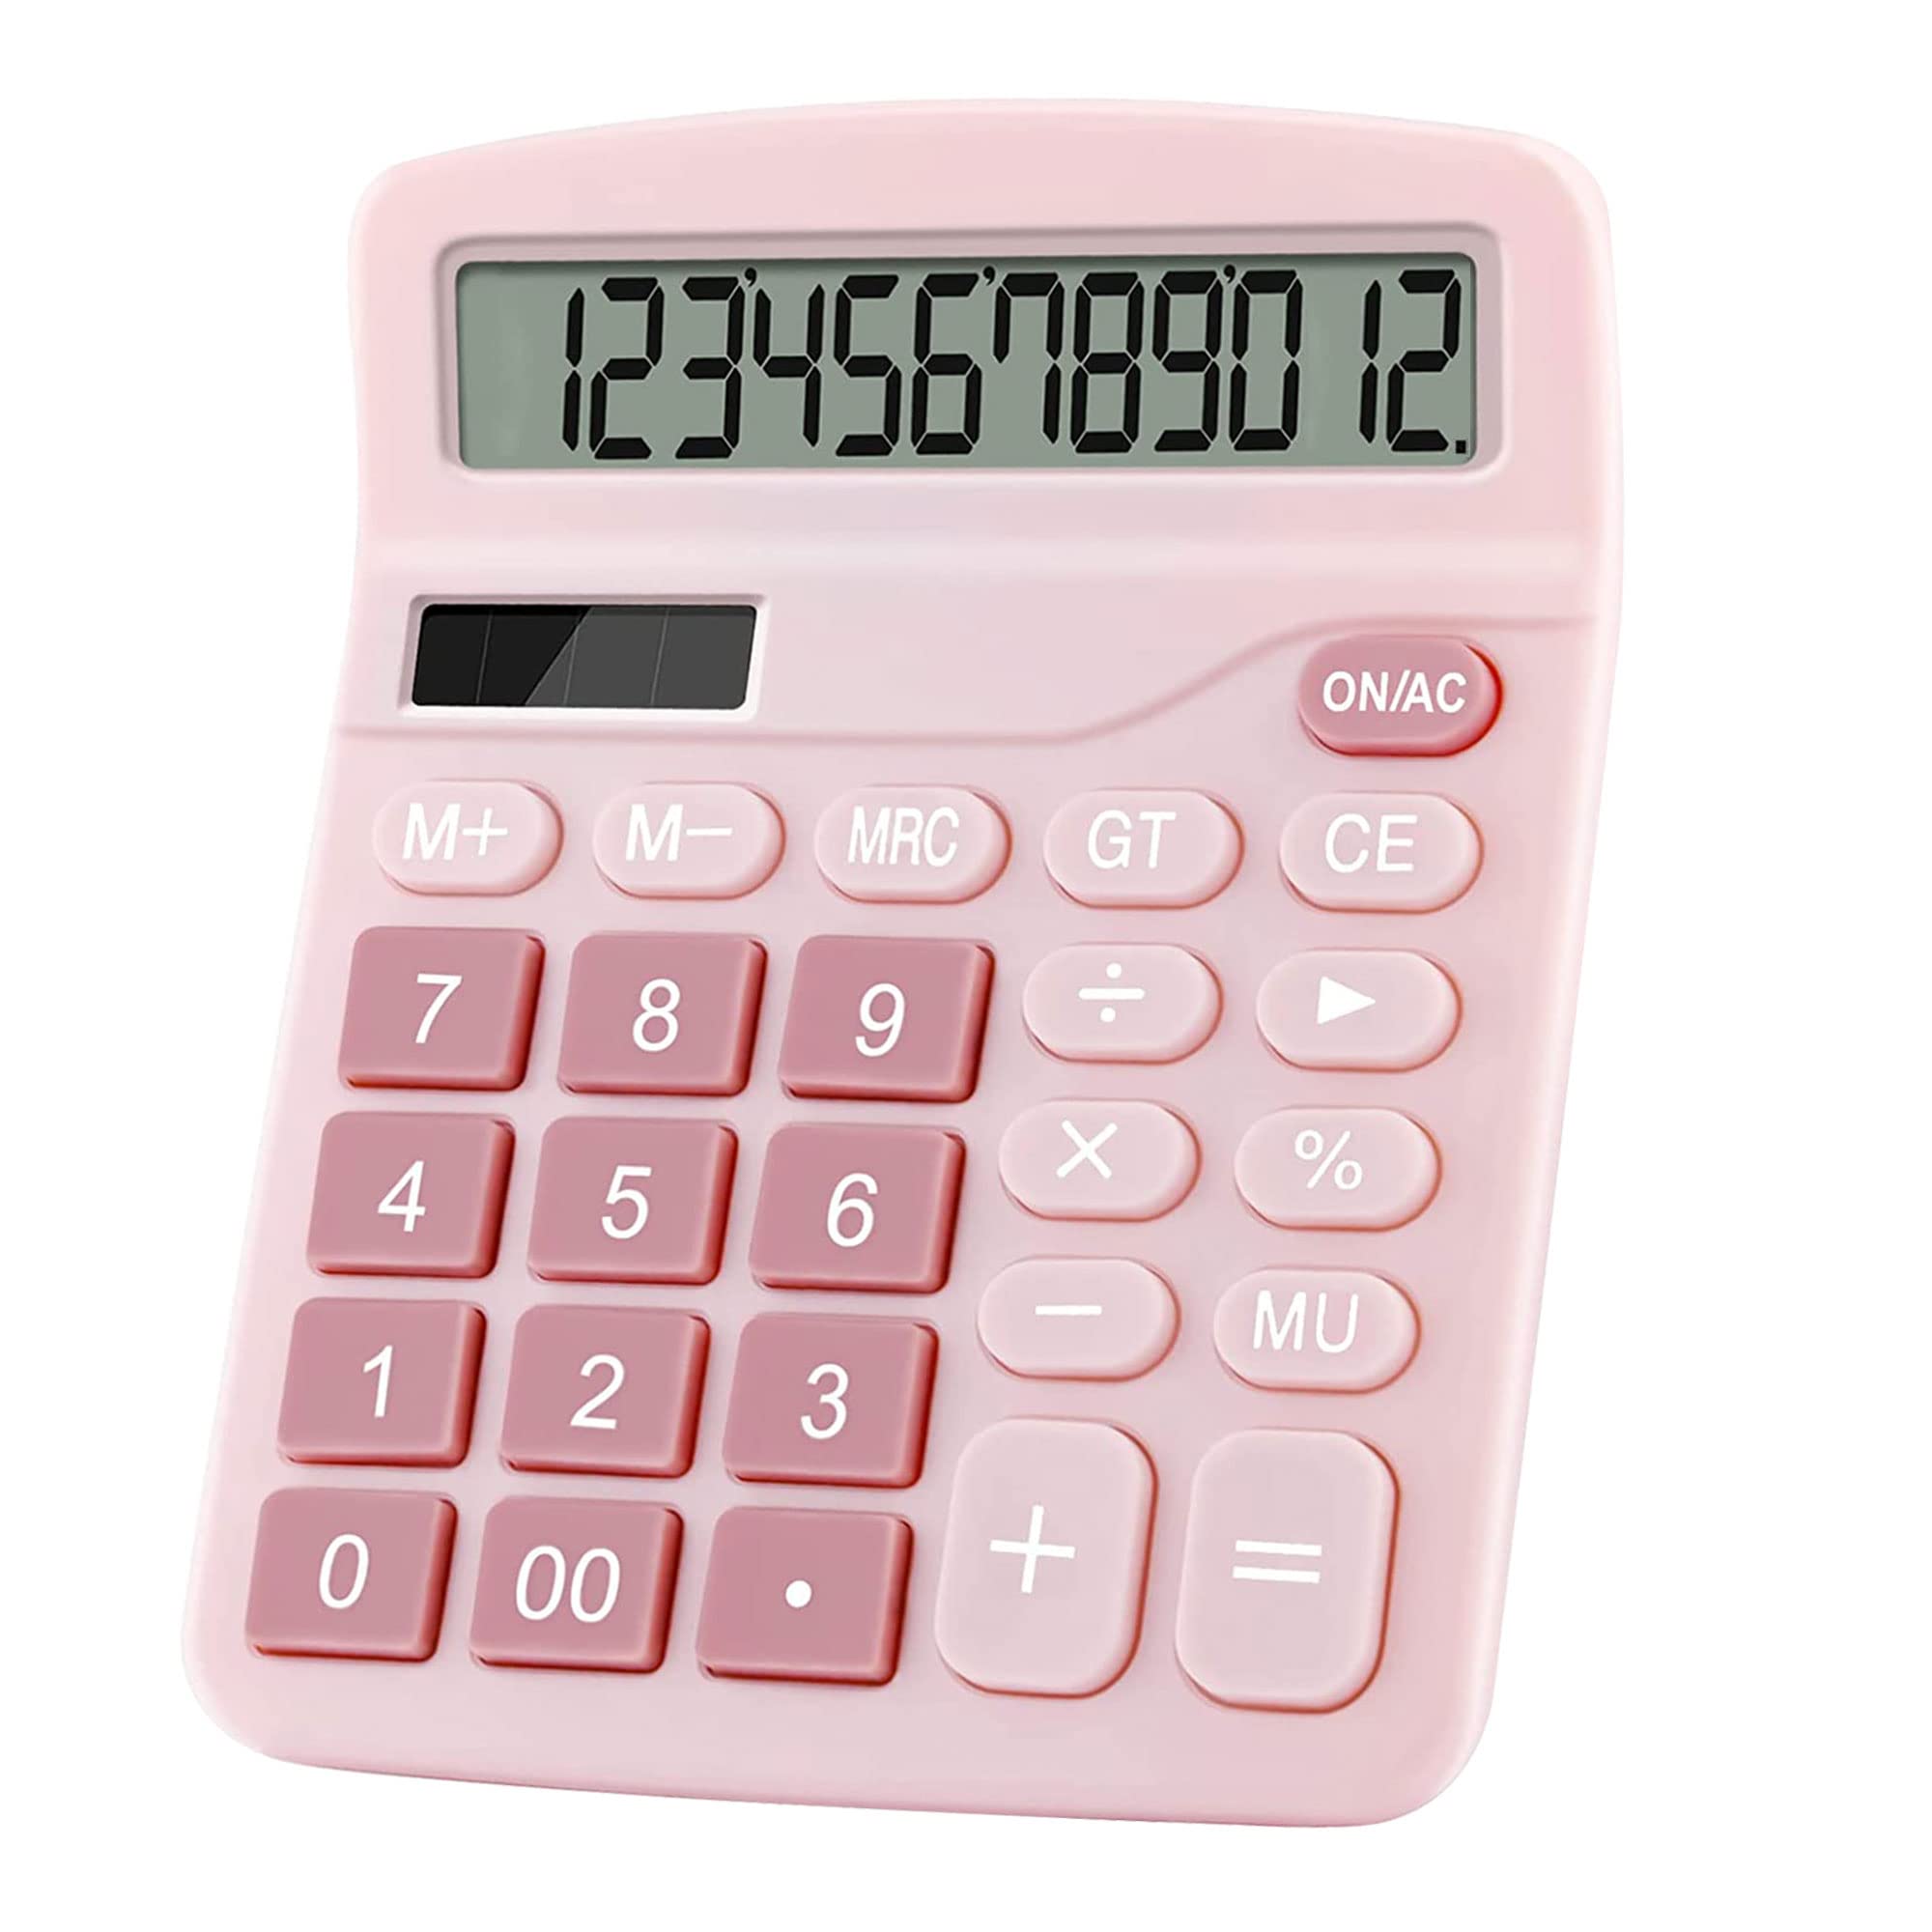 Podokas Office Calculators Desktop, 12-Digit Dual Power Cute Calculator with Large LCD Display Big Button for Office Home and School (Pink)